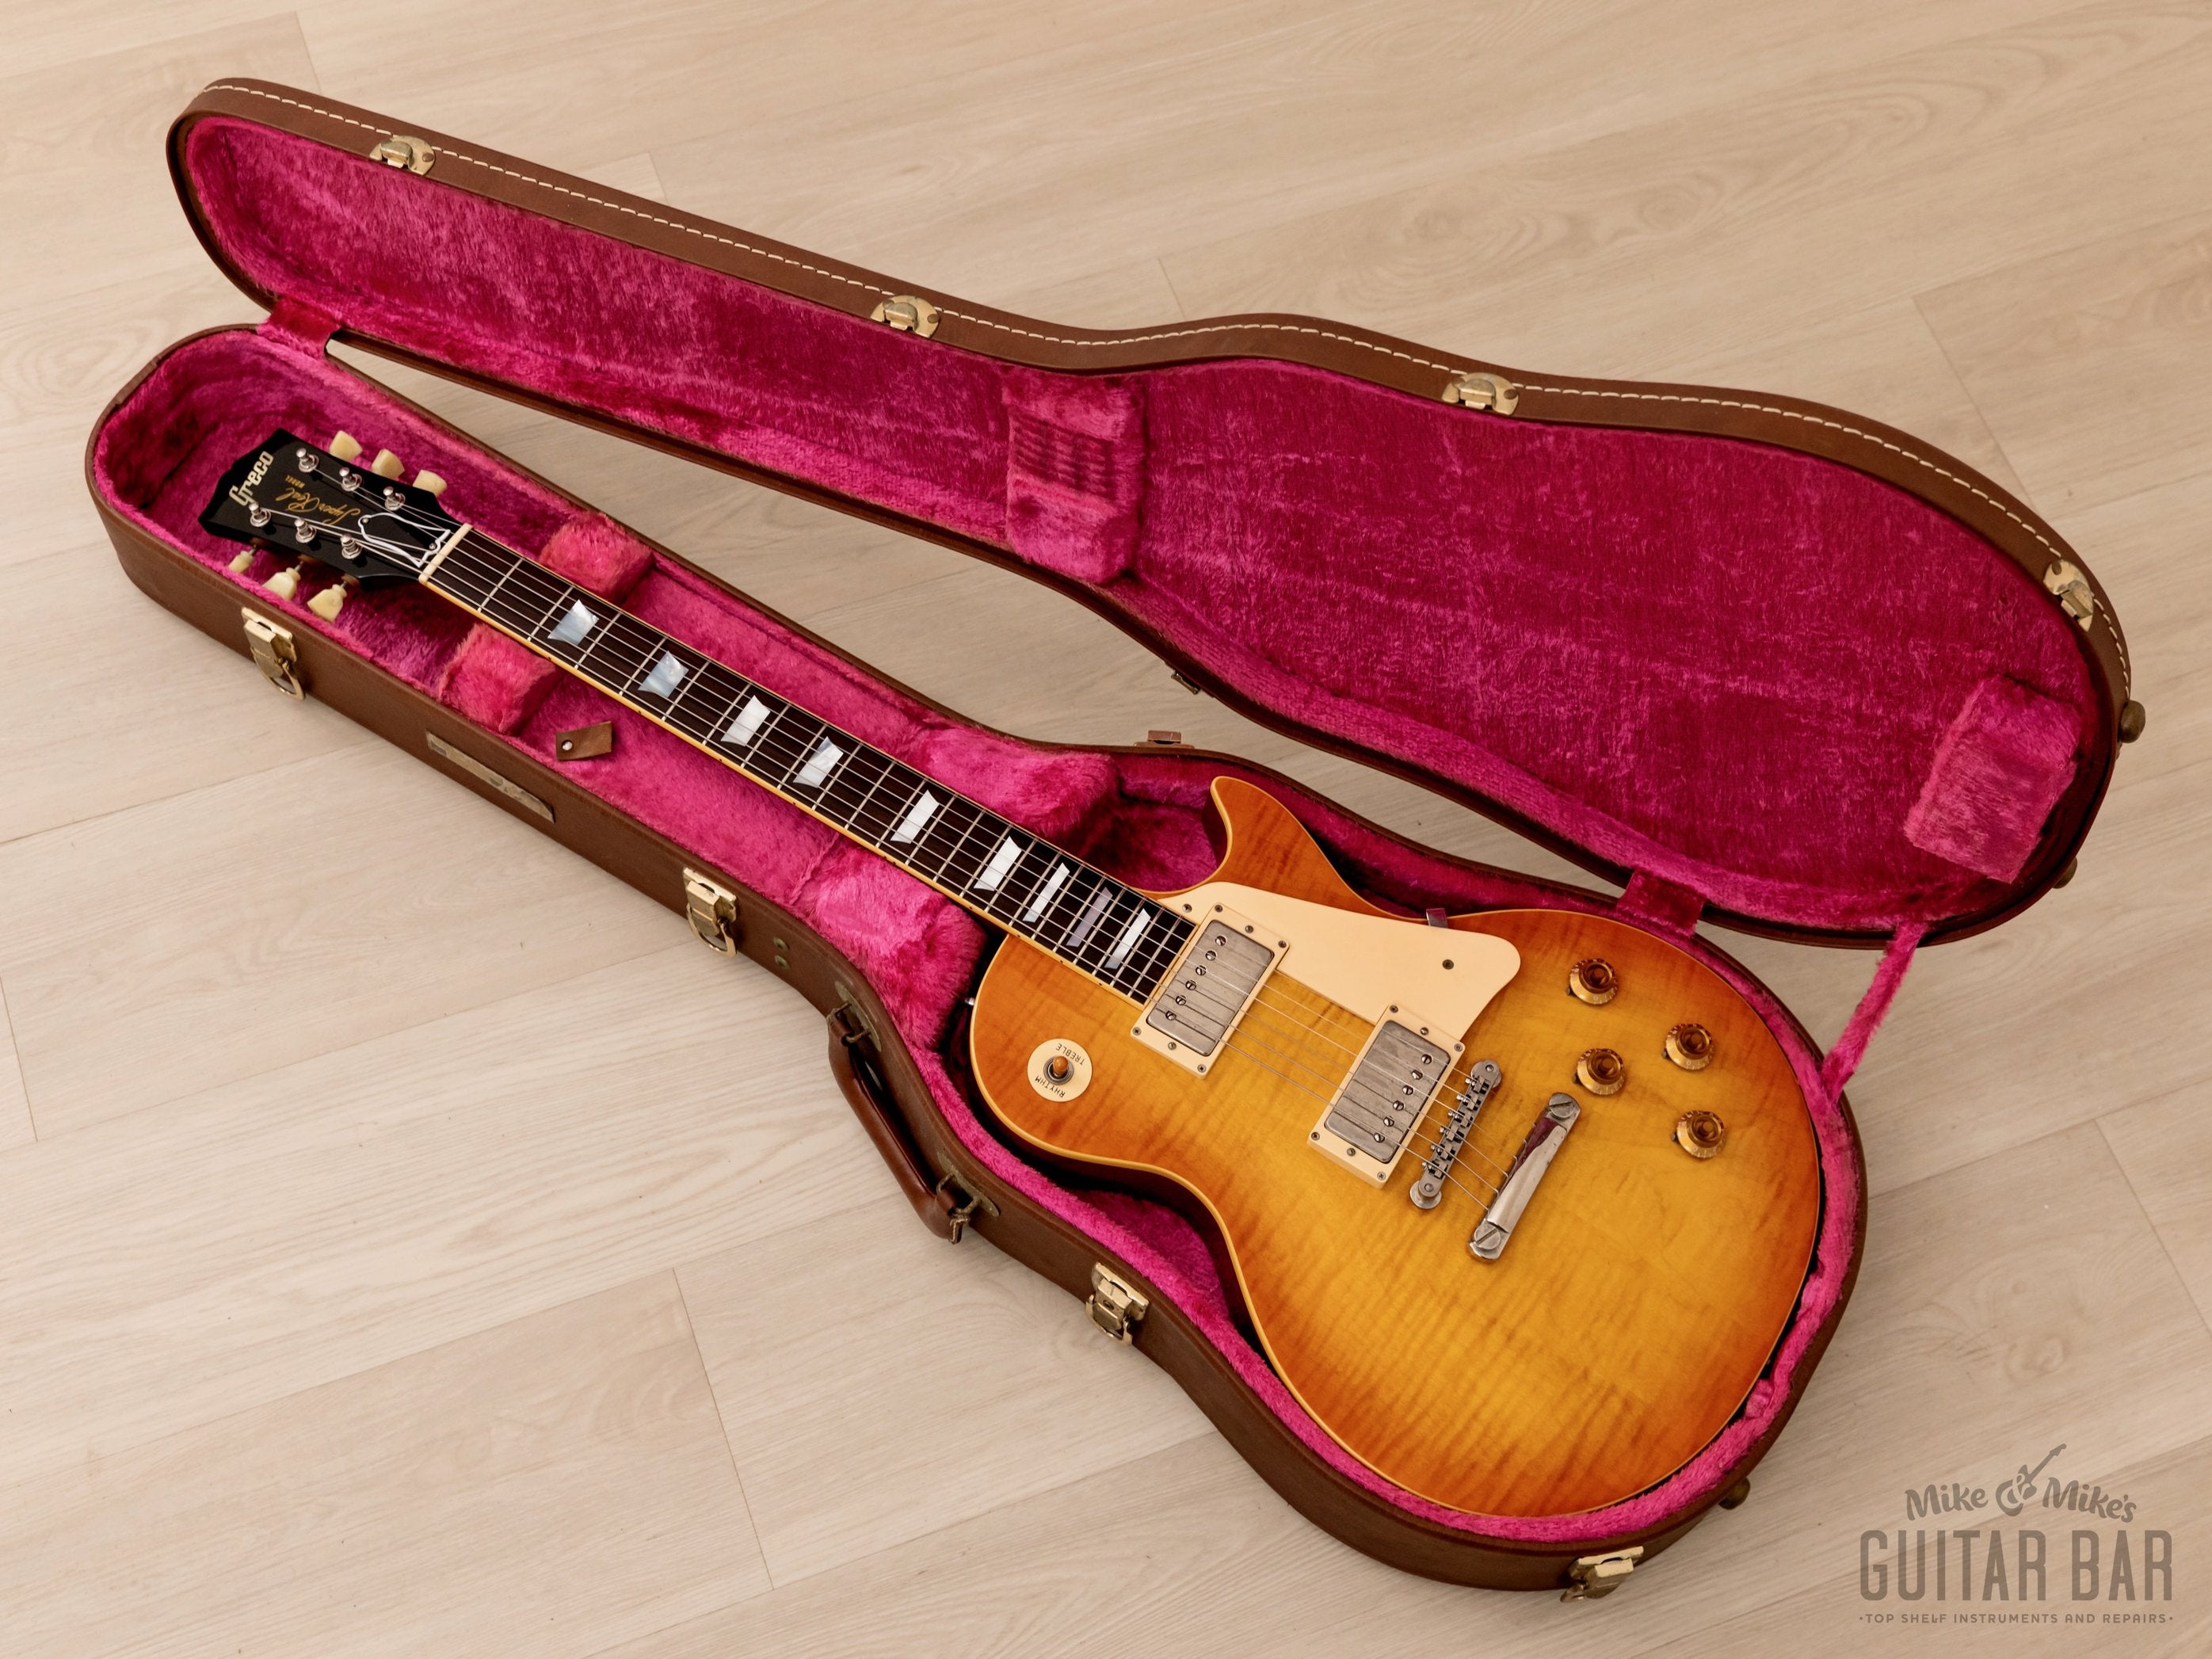 1980 Greco Super Real EGF1200 Vintage Burst Lacquer Finish w/ Dry Z PAFs & Brazilian Board, Japan